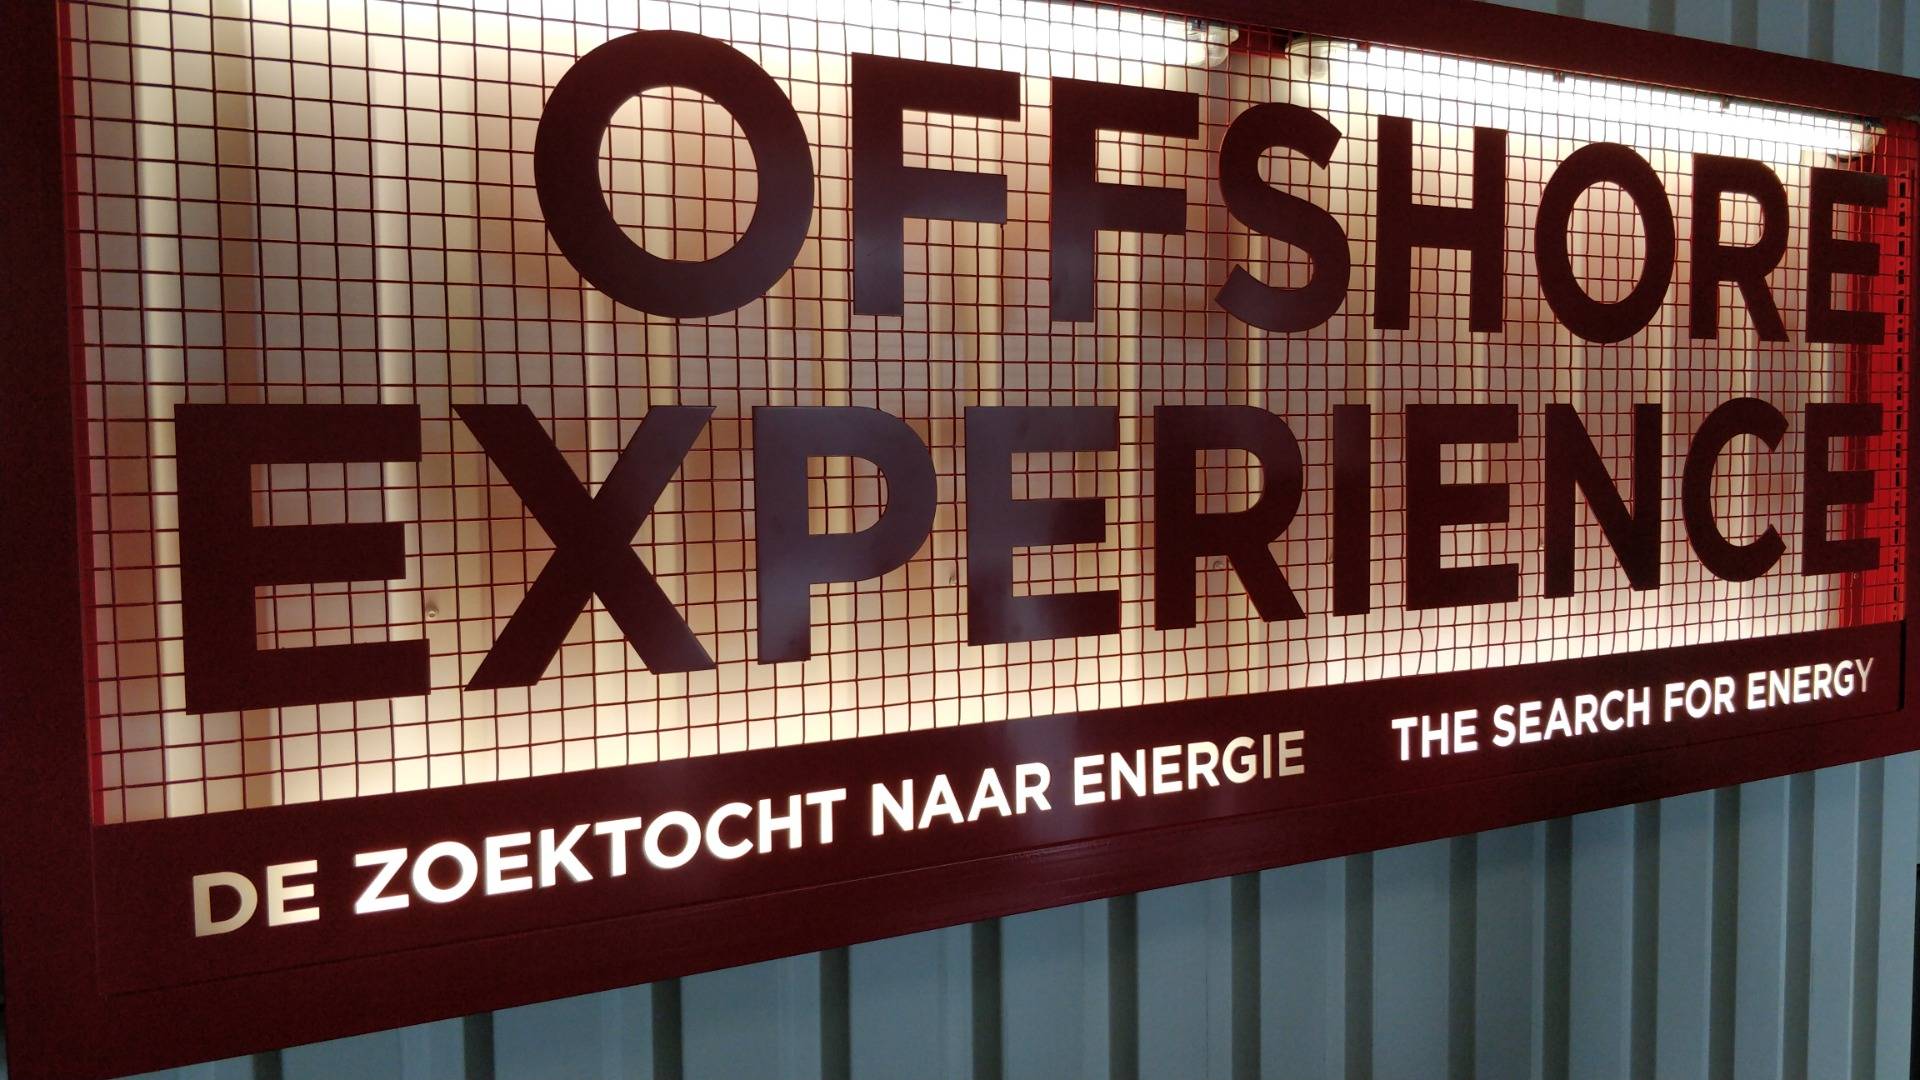 Offshore Experience Exhibition (Maritime Museum, Rotterdam, THE NETHERLANDS)